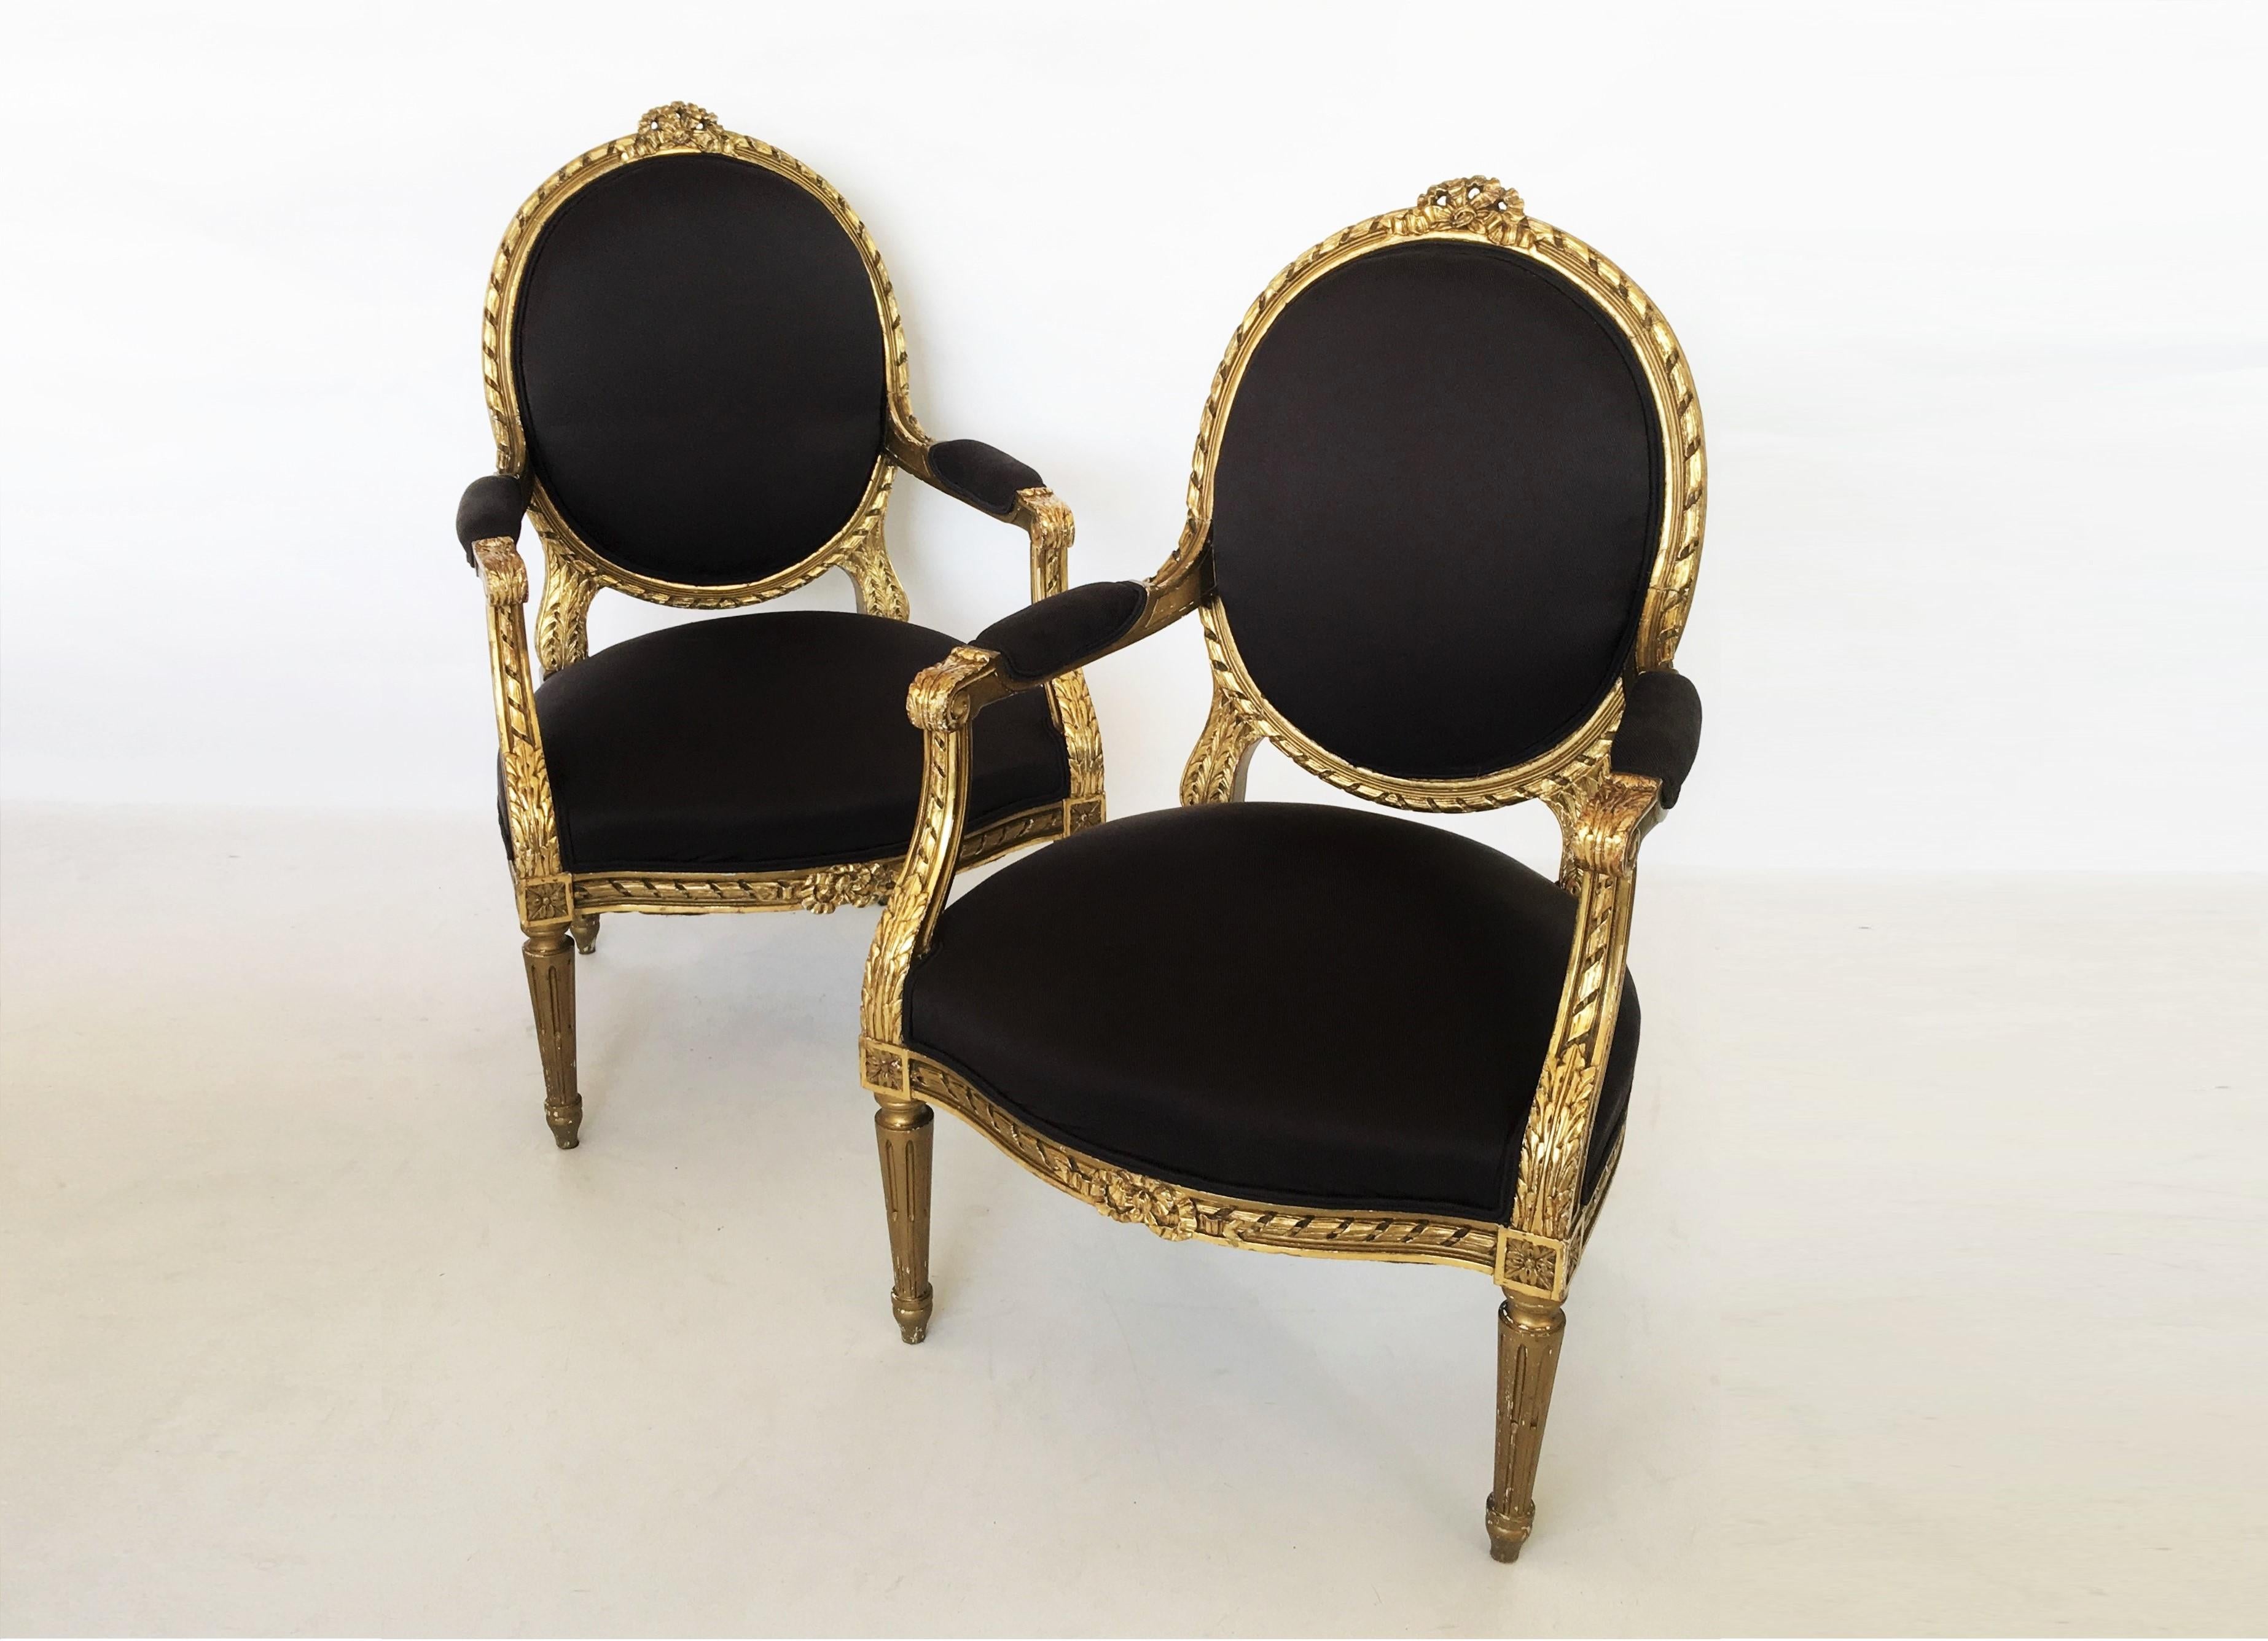 A magnificent pair of 19th-20th century Louis XVI style giltwood open armchairs of exceptional quality and scale. Each of the armchairs with elongated oval backs, carved frame banderole and knot moulding are beautifully designed with a top central